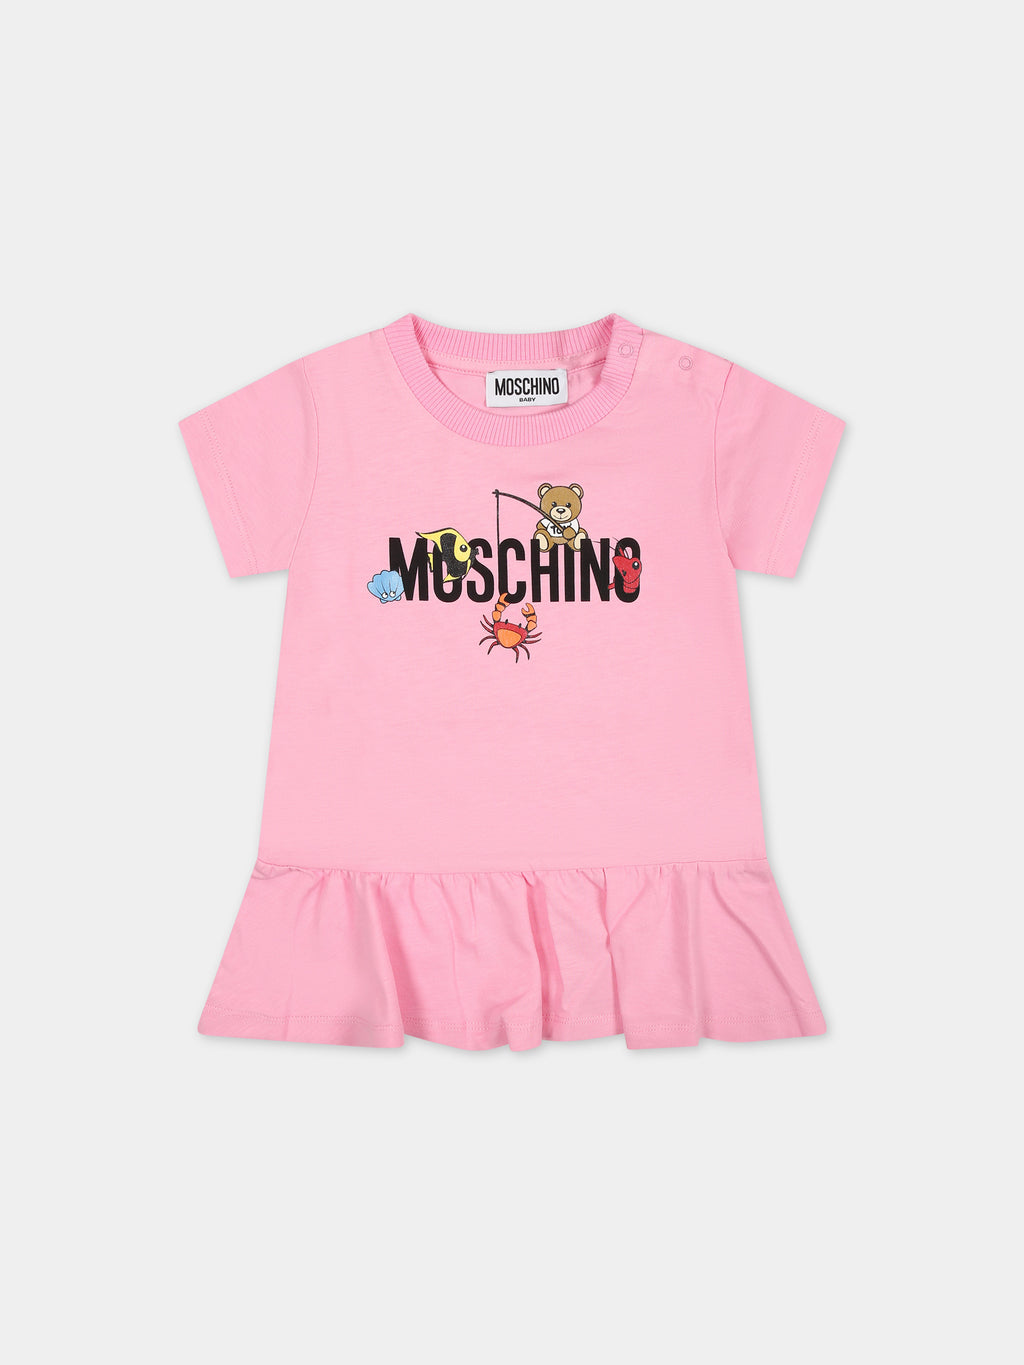 Pink dress for baby girl with logo and animals